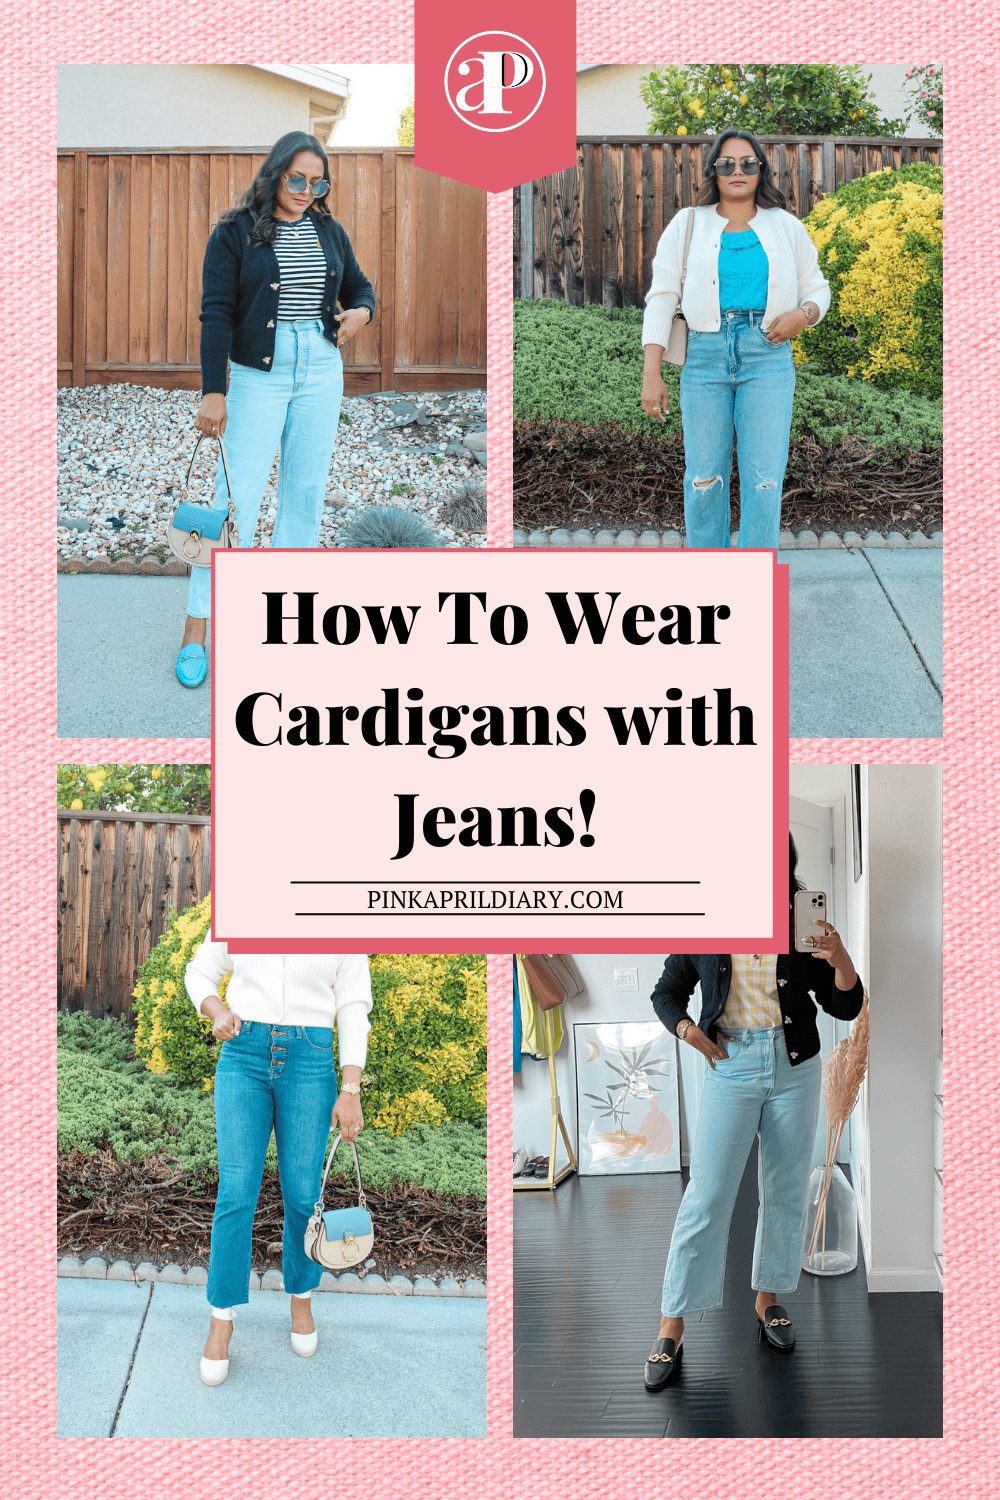 How to Wear Cardigans with Jeans Without Looking Frumpy